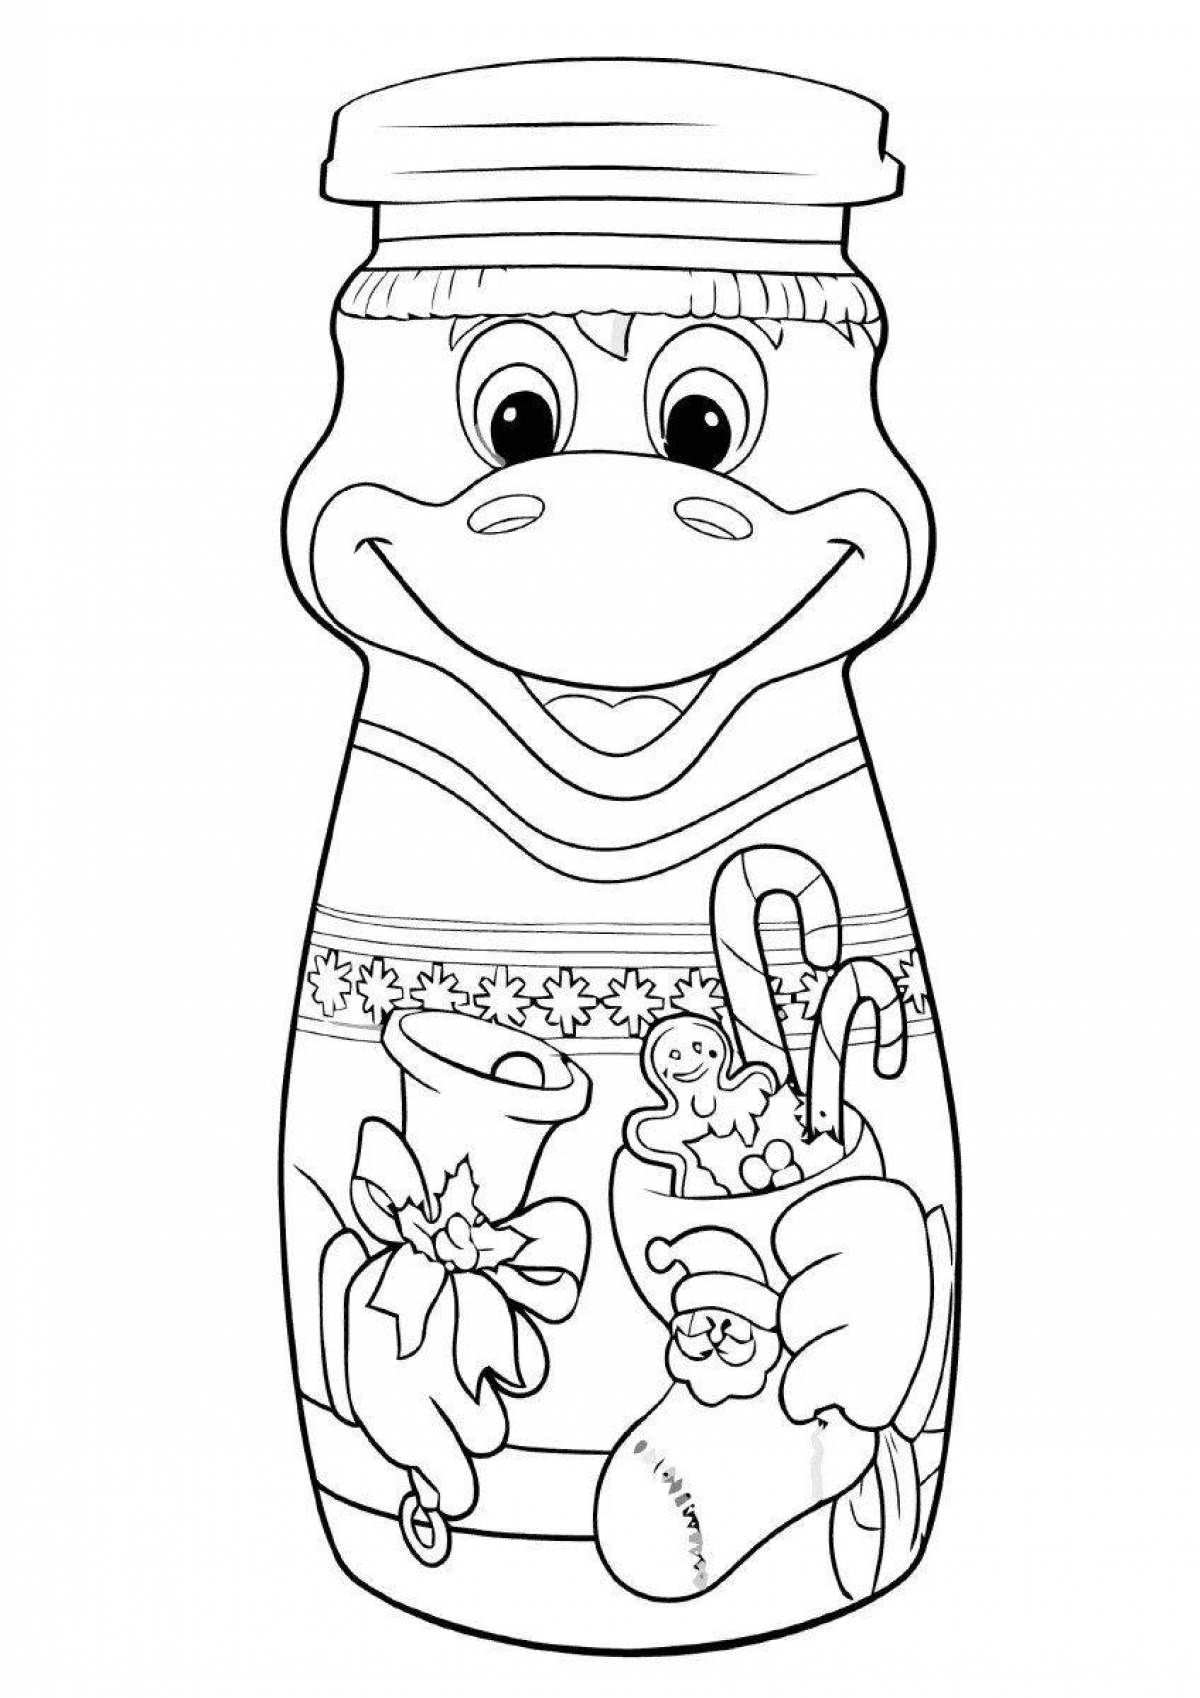 Agushi colorful coloring page